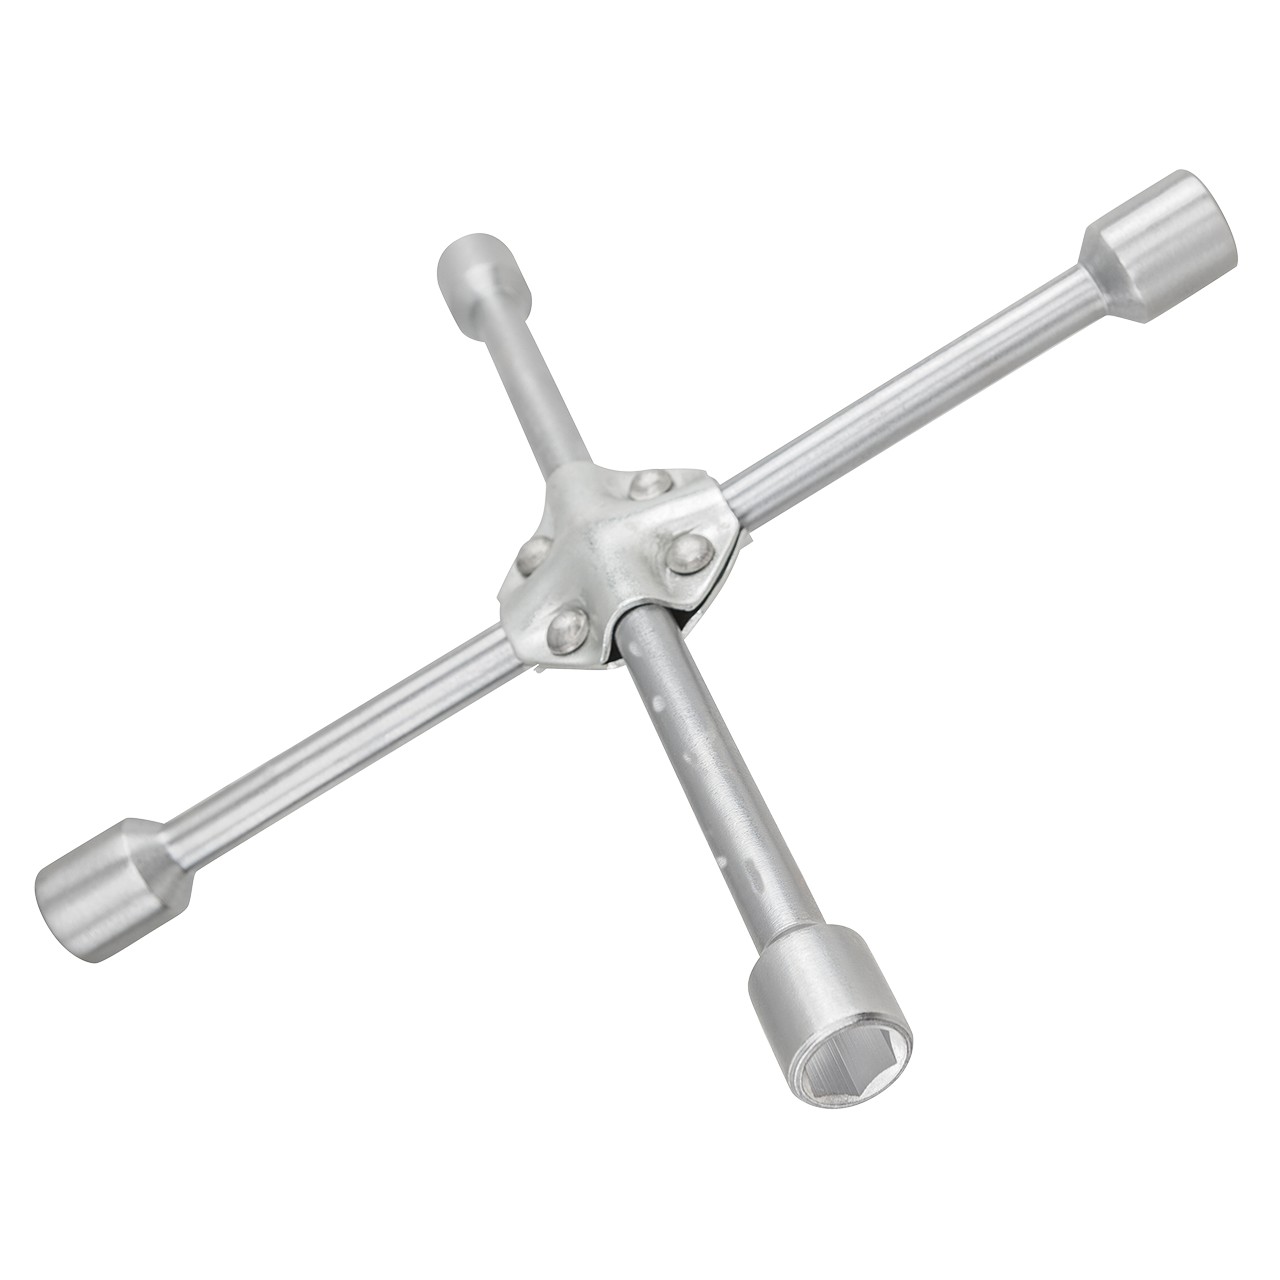 4-Way Wheel Wrench for cars